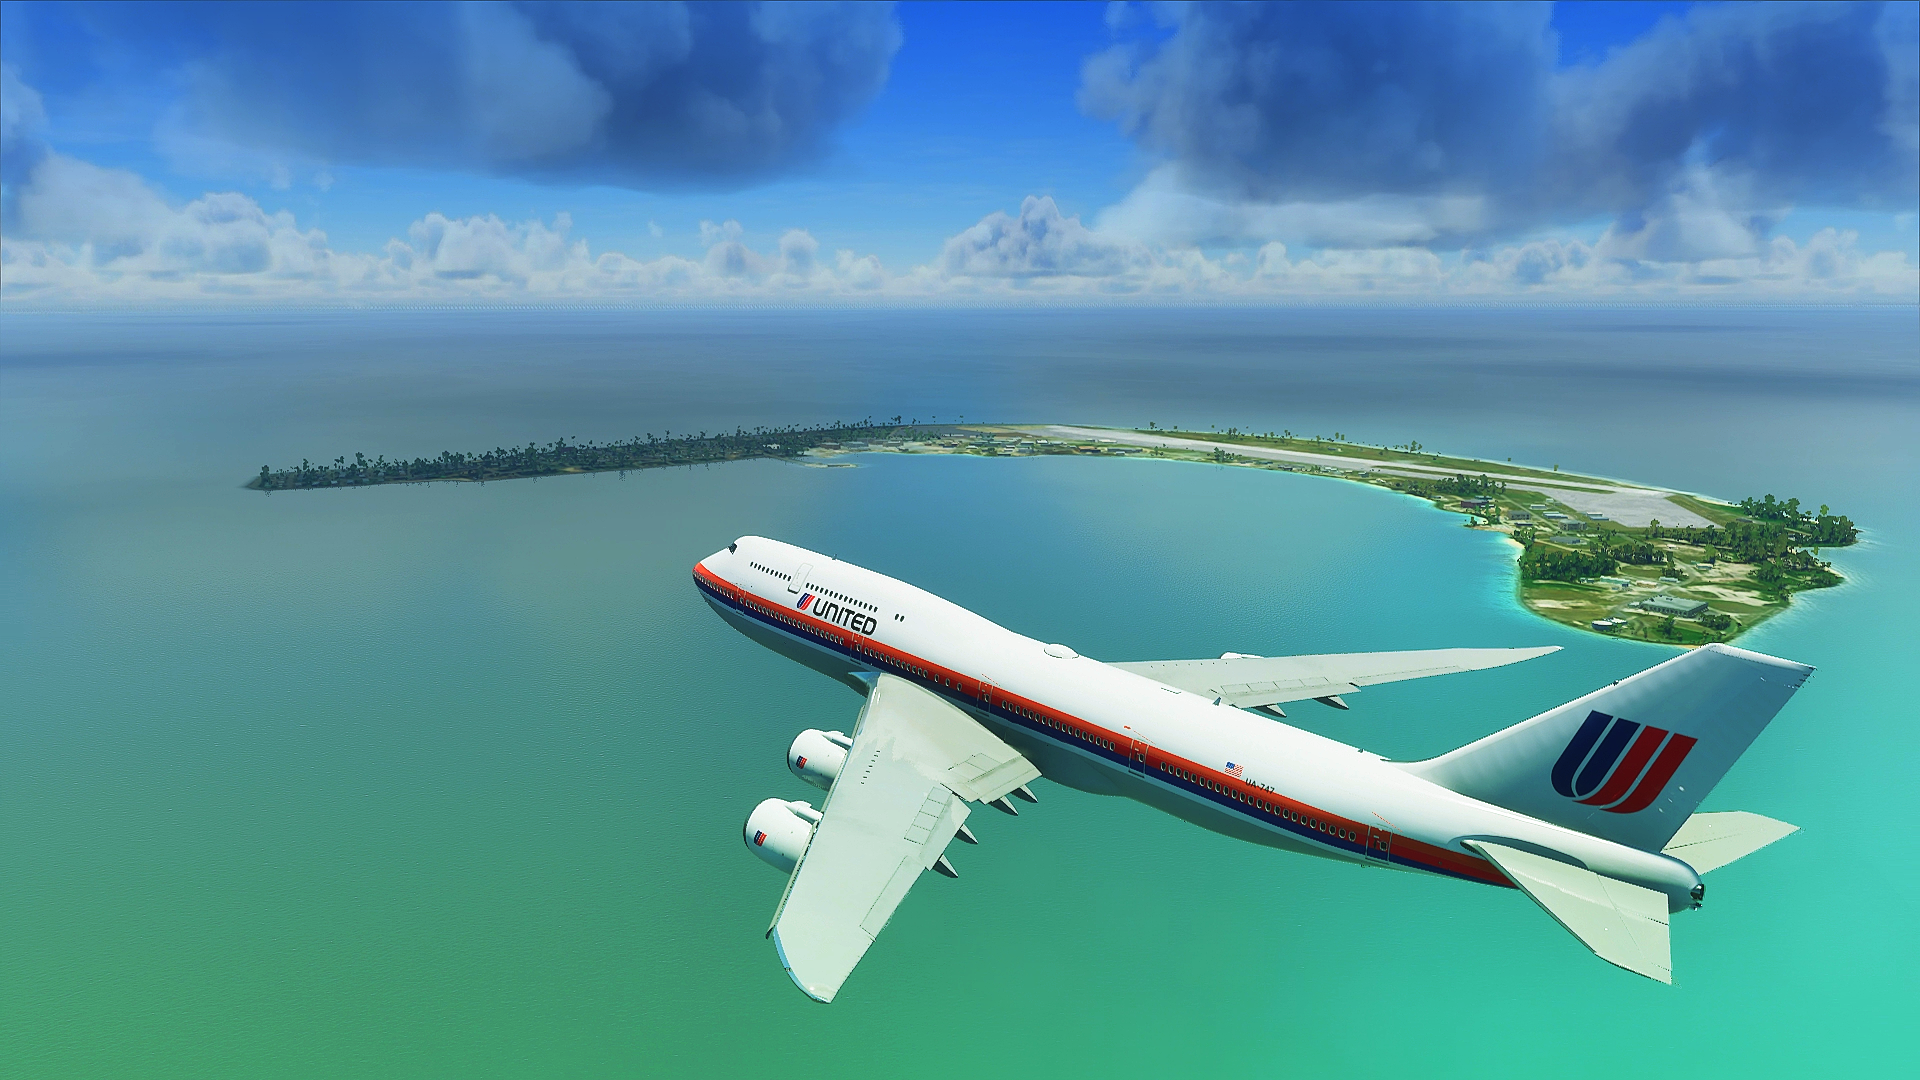 Finished 80 S United 747 Livery At Kwajalein Atoll South Pacific User Screenshot Gallery Microsoft Flight Simulator Forums - thai airways boeing 747 400 star alliance livery roblox